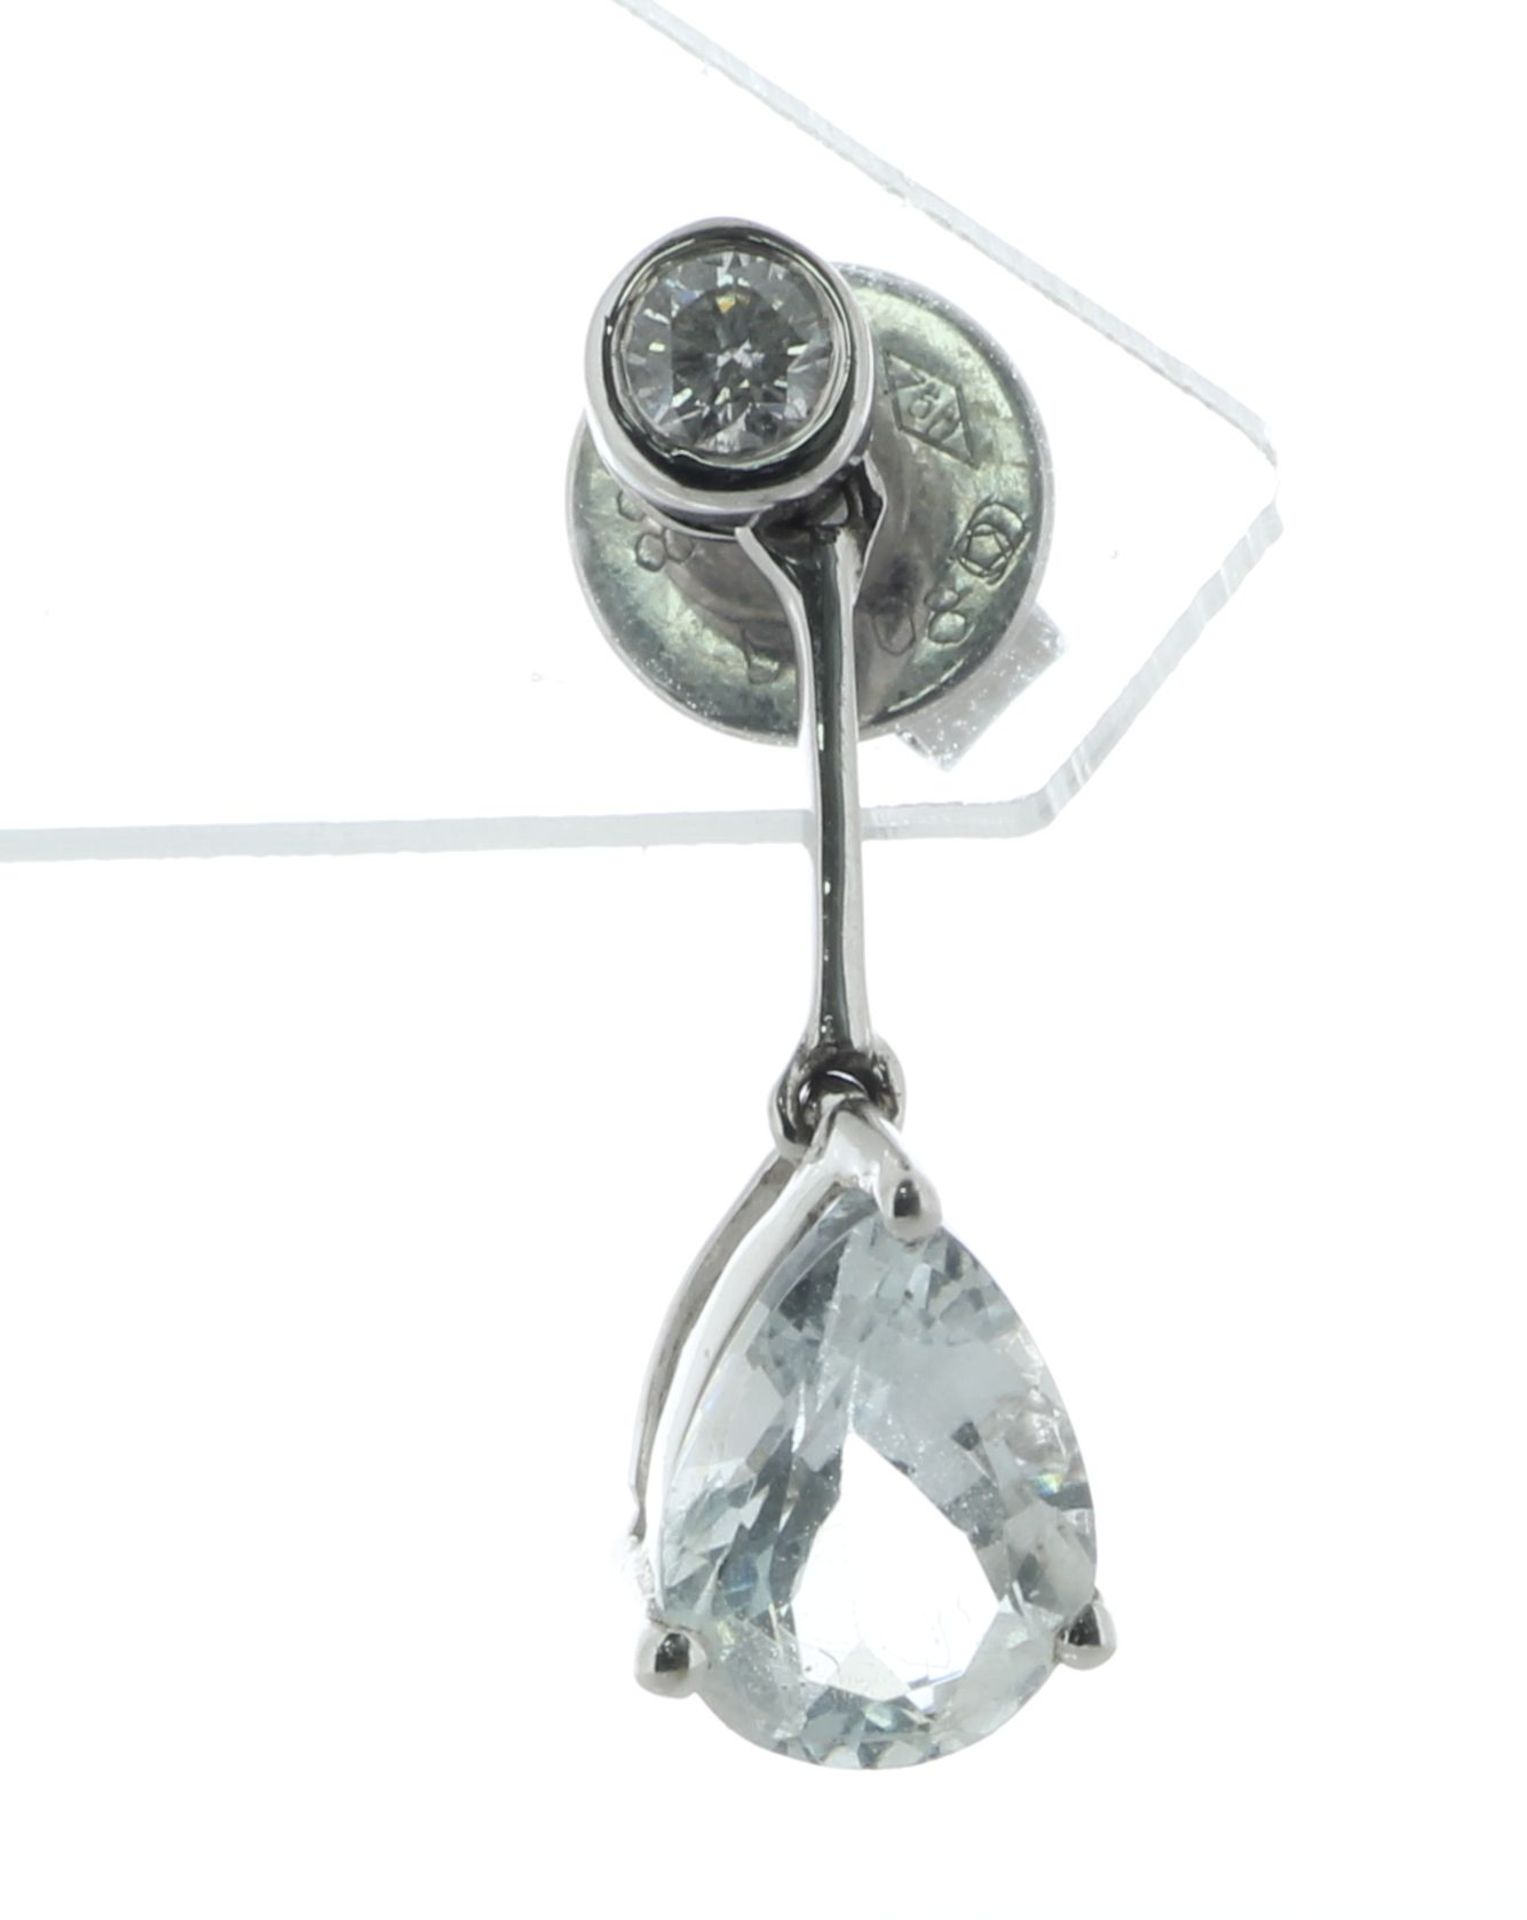 18ct White Gold Diamond And Aqua Marine Drop Earrings (AM1.36) 0.16 Carats - Valued By AGI £3,250.00 - Image 4 of 6